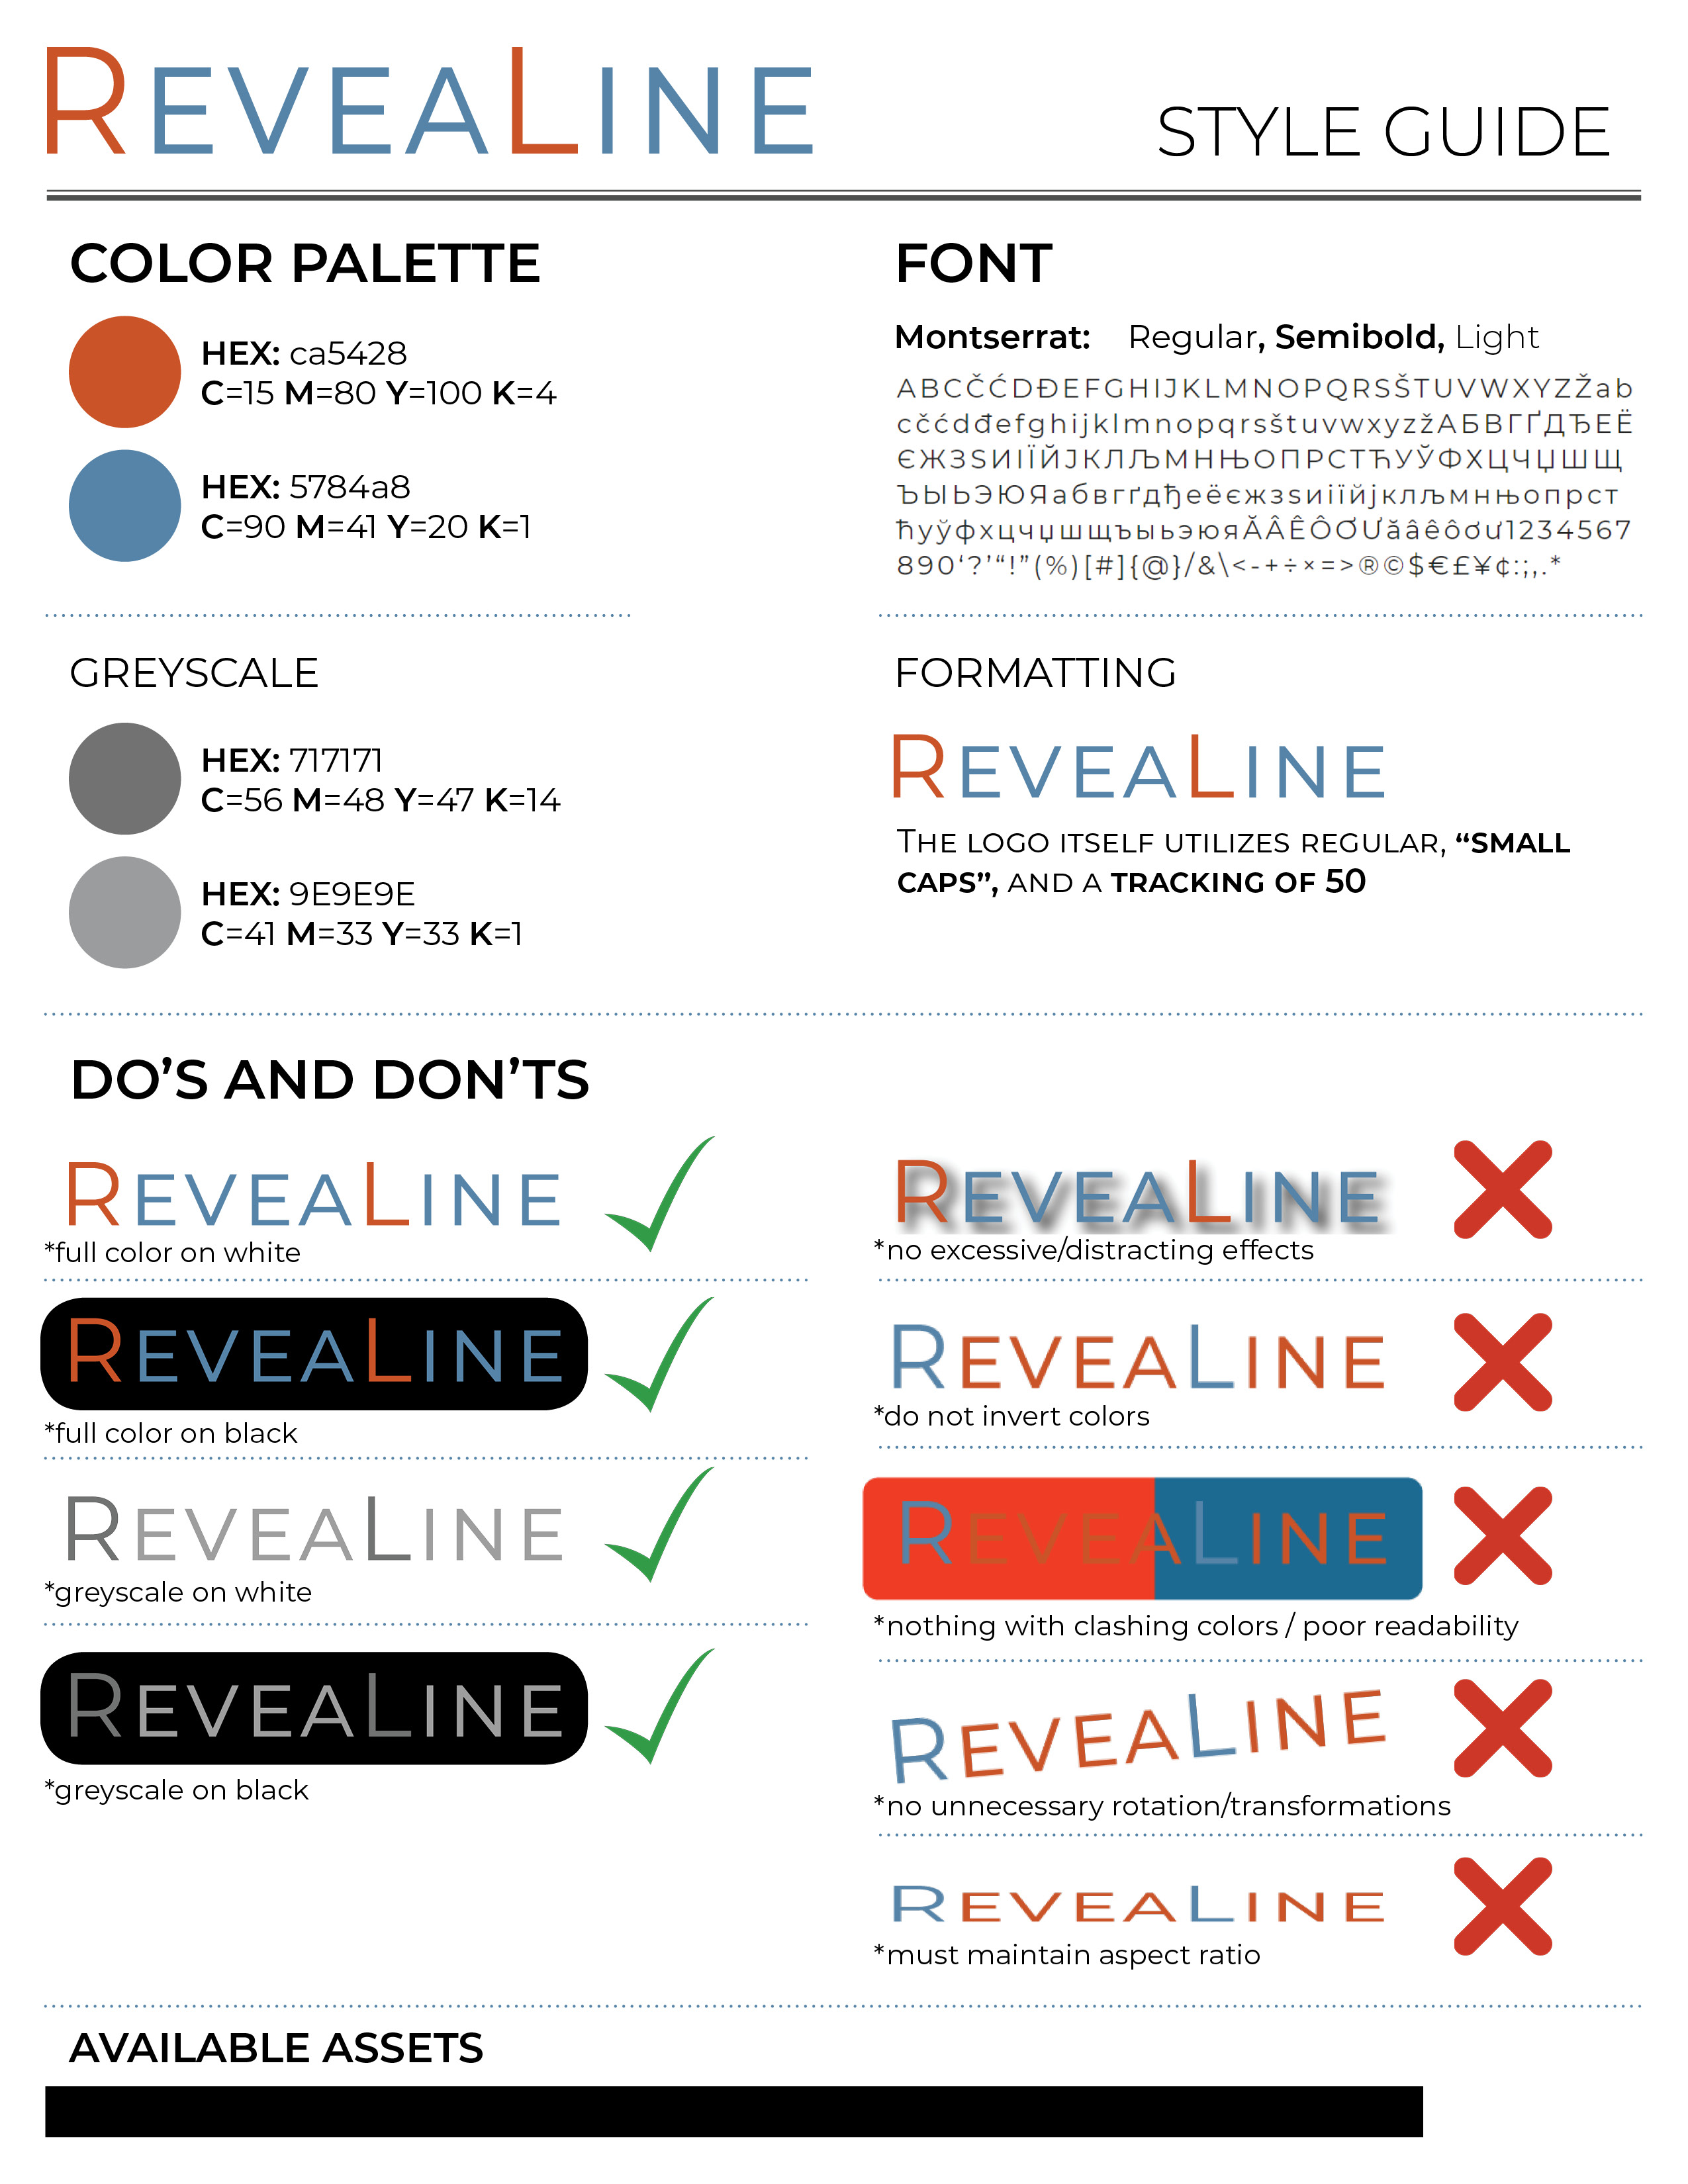 ReveaLine Style Guide